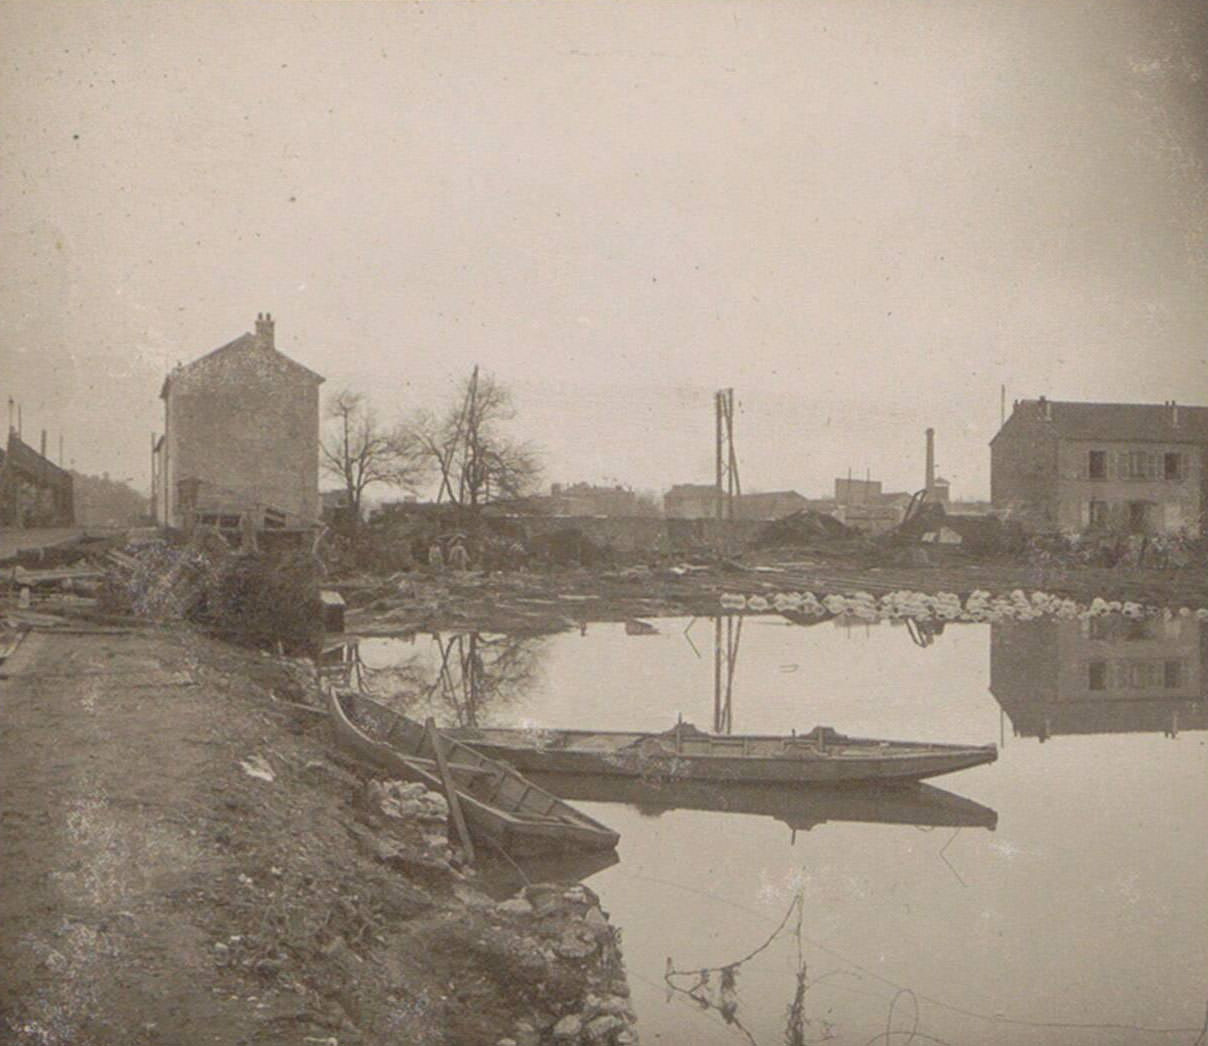 Boat and houses in a flooded suburb of Paris. Part of photo album of the 1910 flooding in Paris and suburbs.